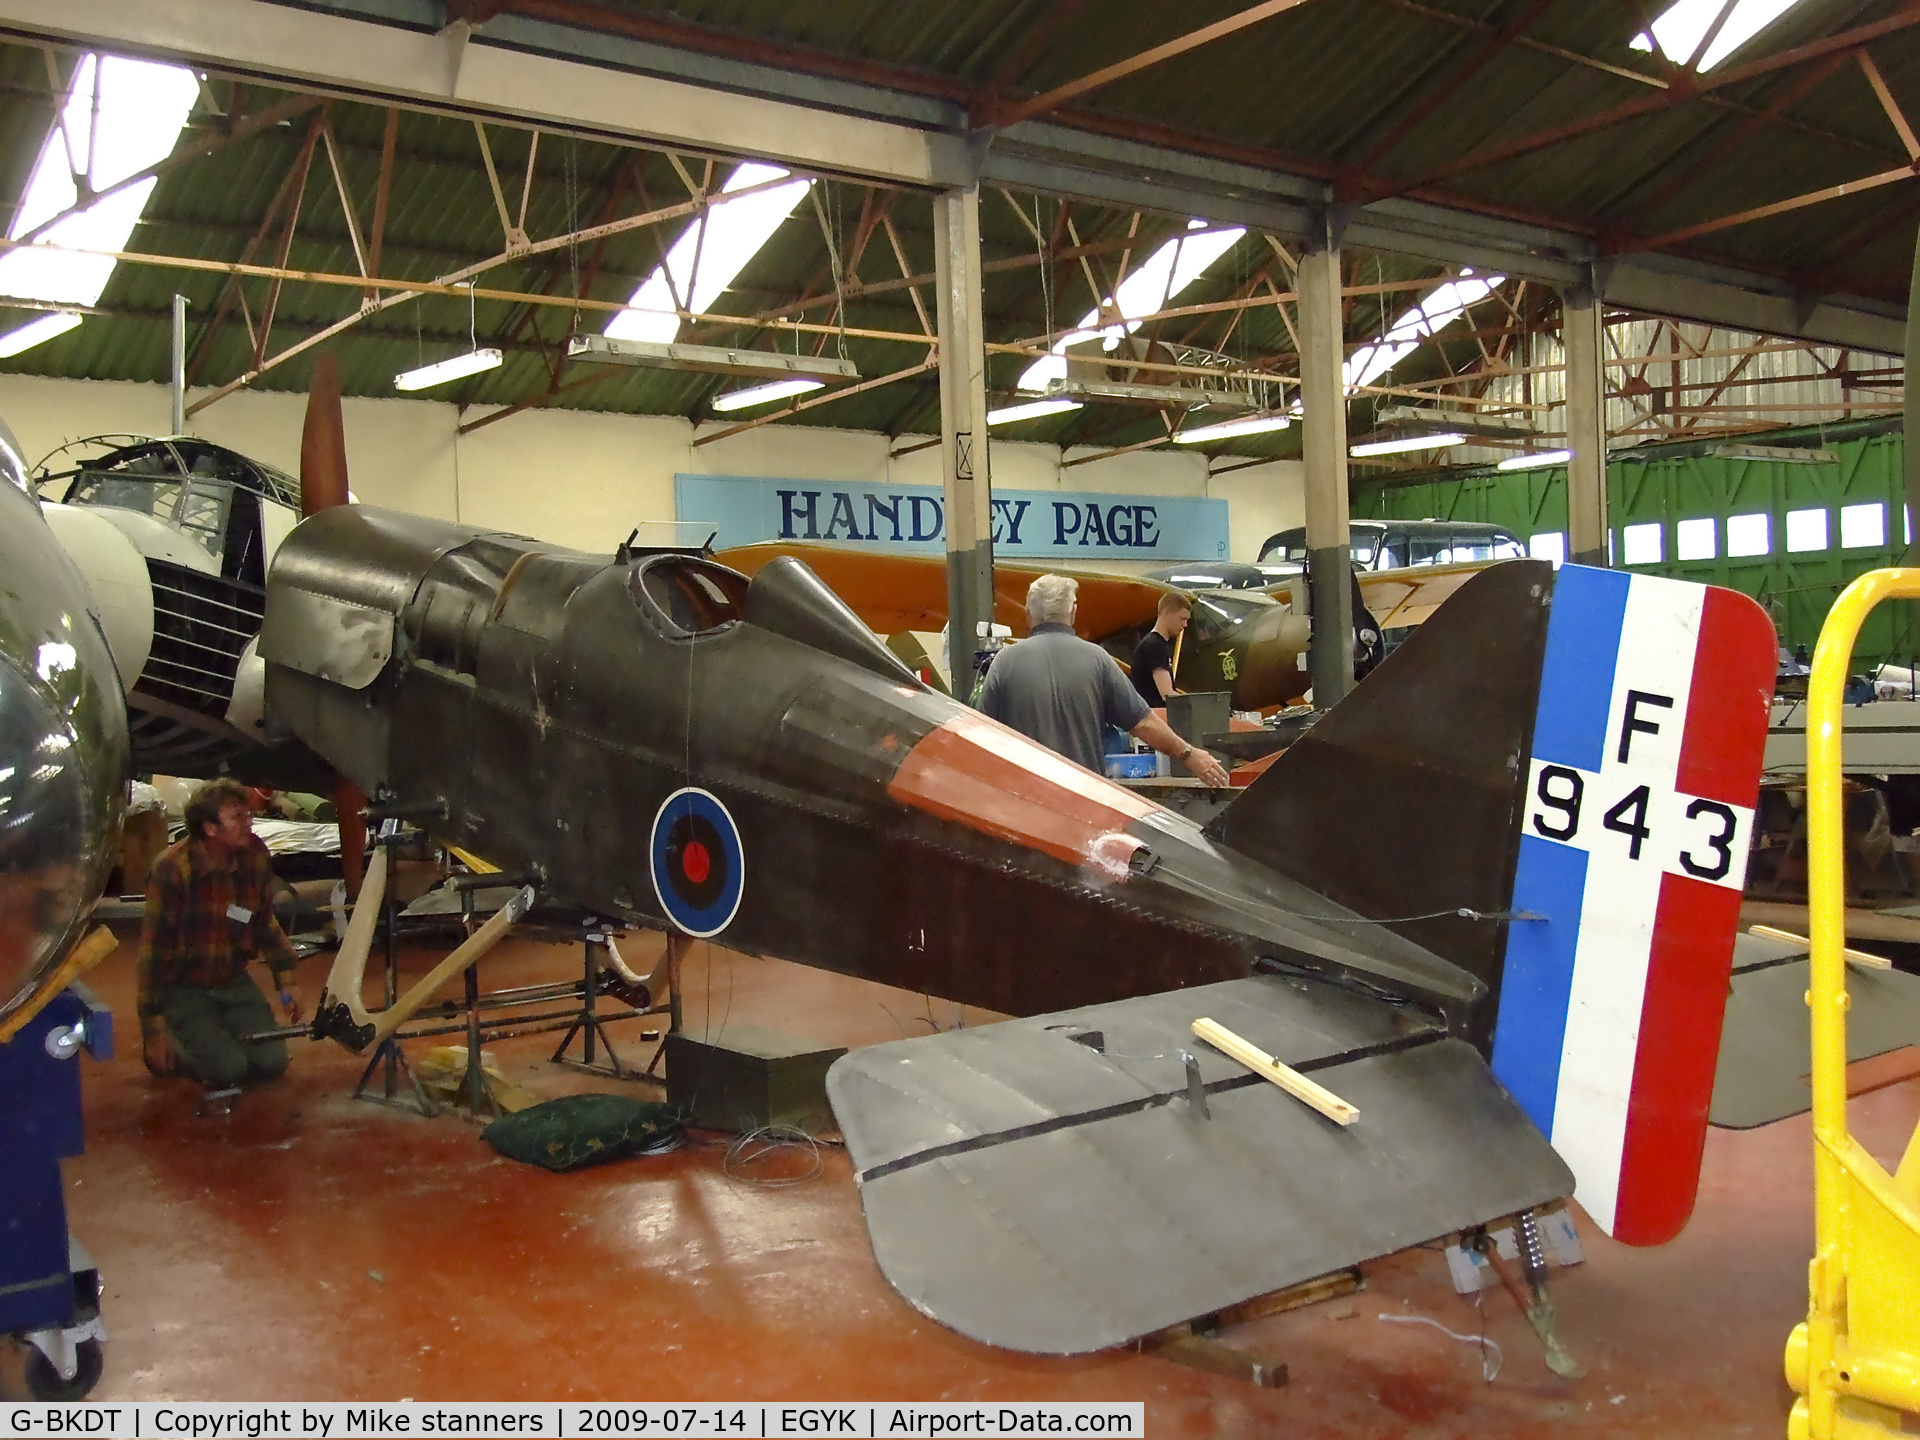 G-BKDT, Royal Aircraft Factory SE-5A Replica C/N 278, F943 in the workshop at the Yorkshire air museum,Elvington